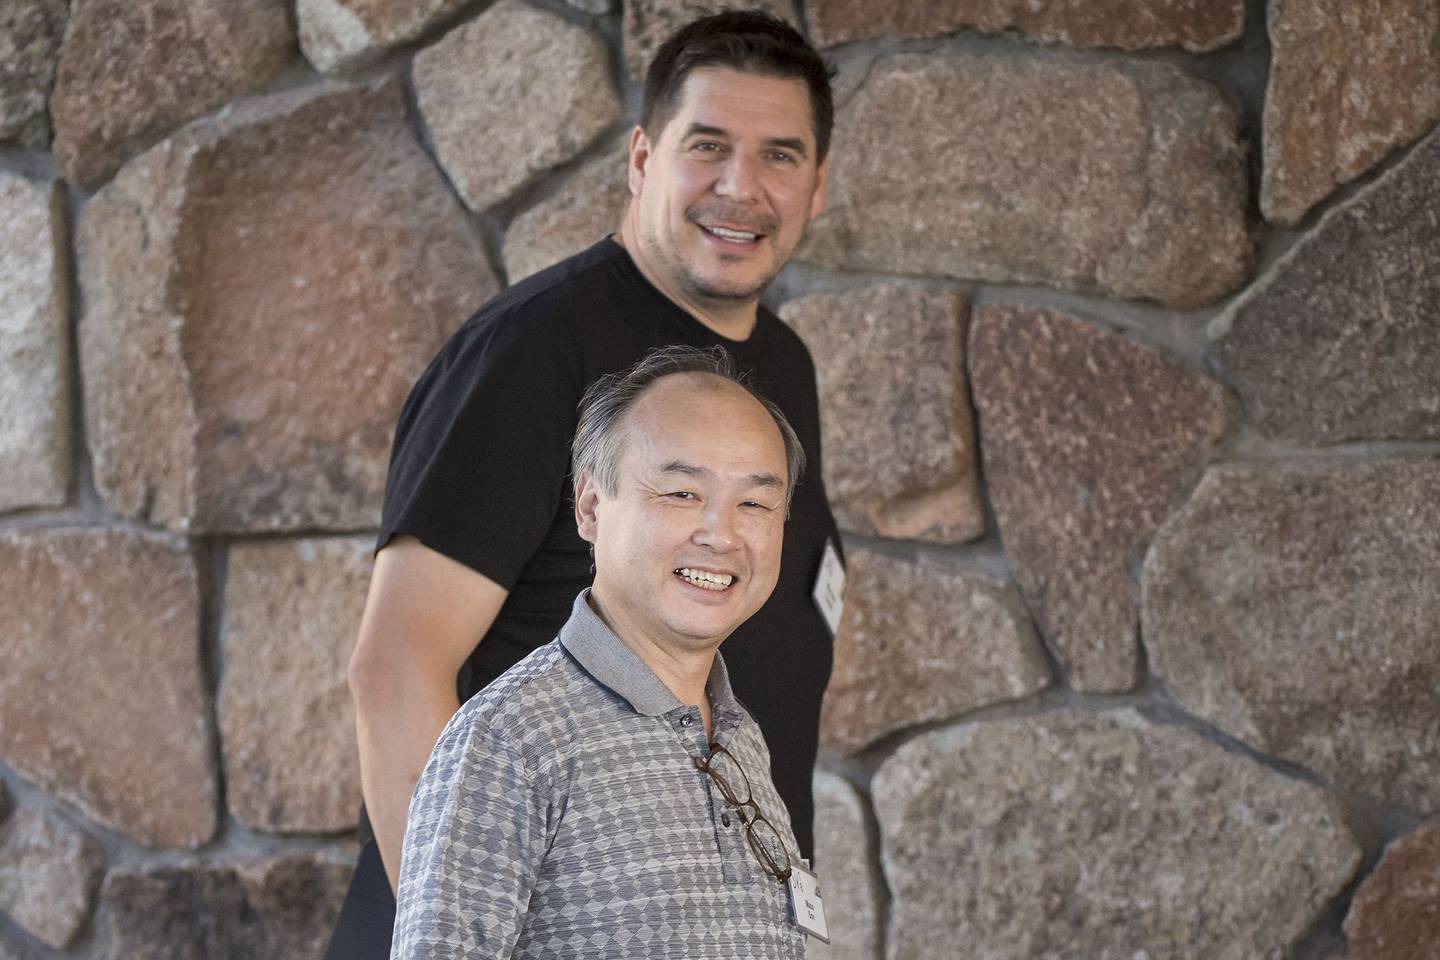 Masayoshi Son and Marcelo Claure in Sun Valley, Idaho, in 2018.dfd